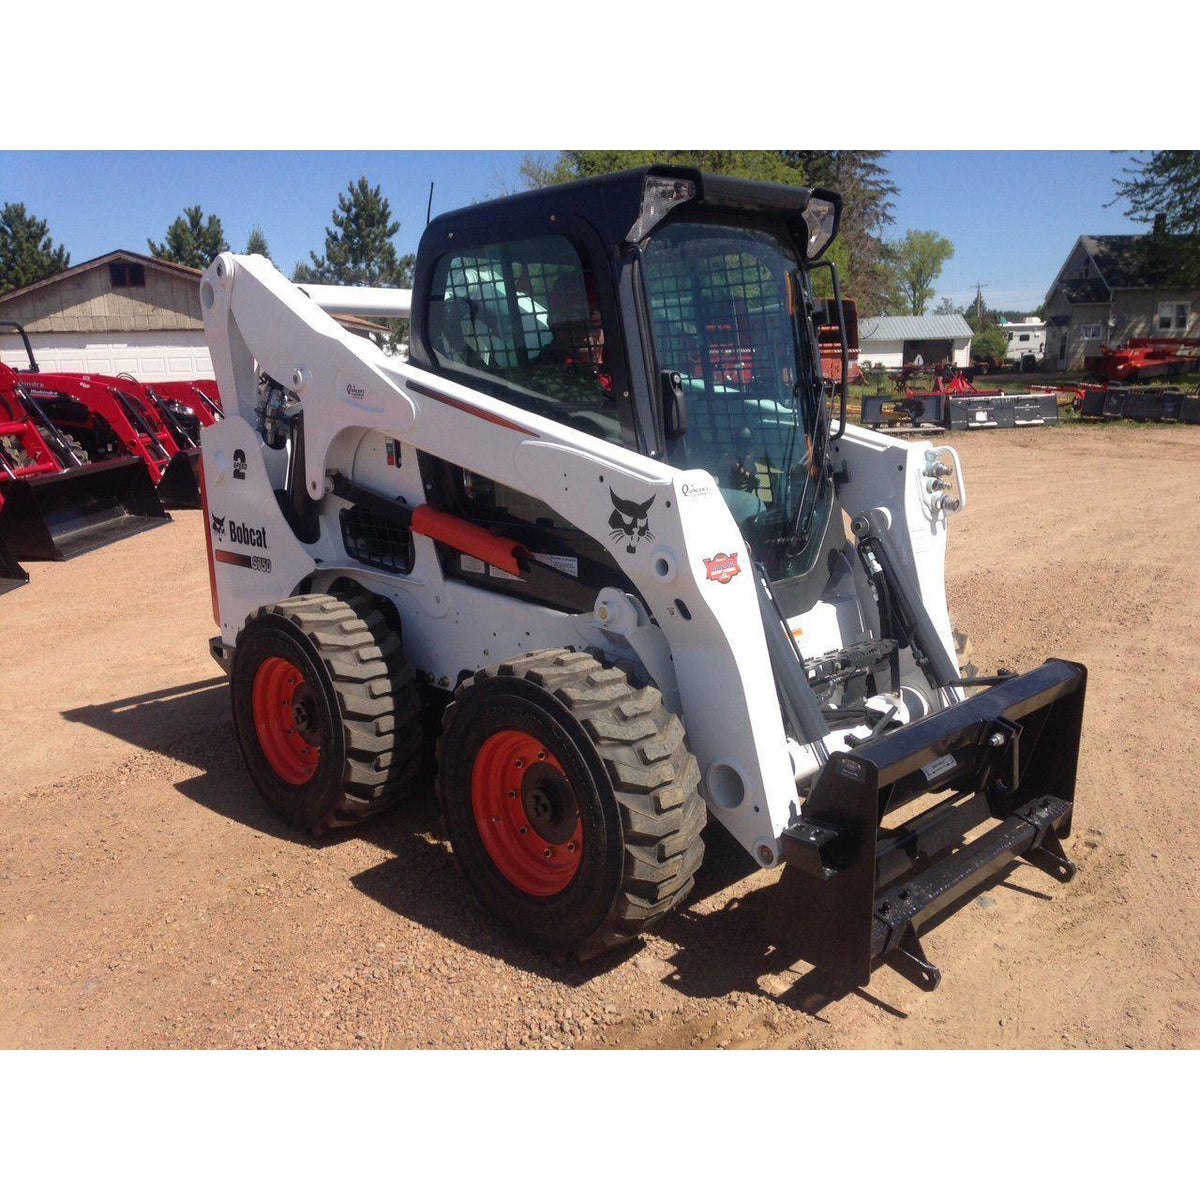 bobcat skid steer with the 3 point adapter attachment for skid steers and tractors from berlon